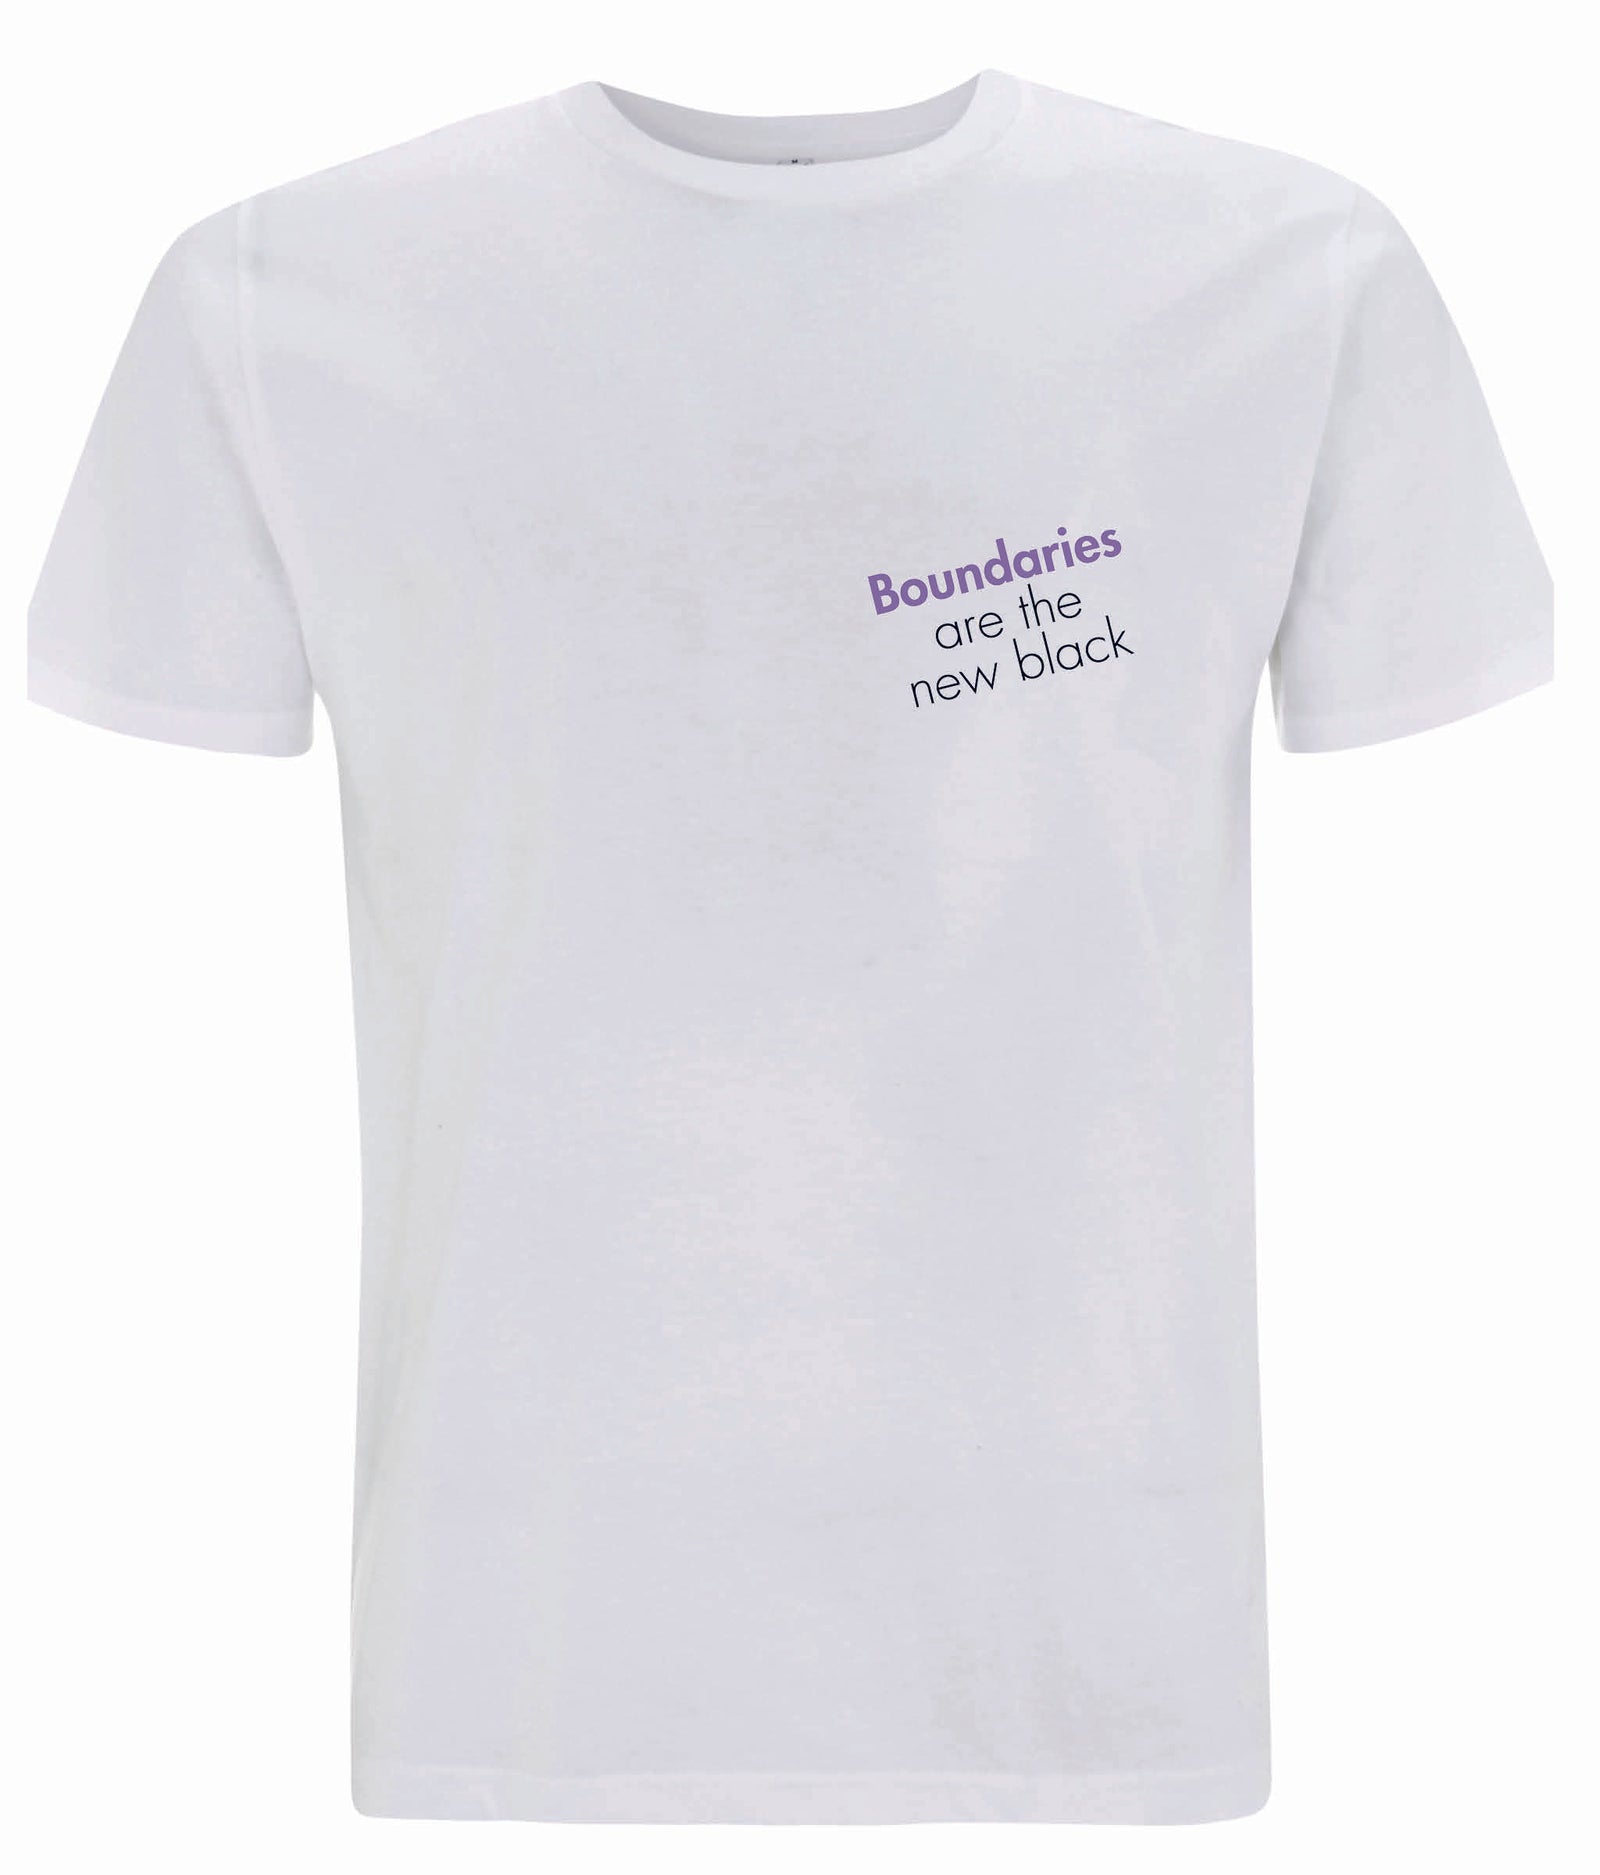 Fashion Look Featuring No Boundaries T-shirts by retailfavs - ShopStyle